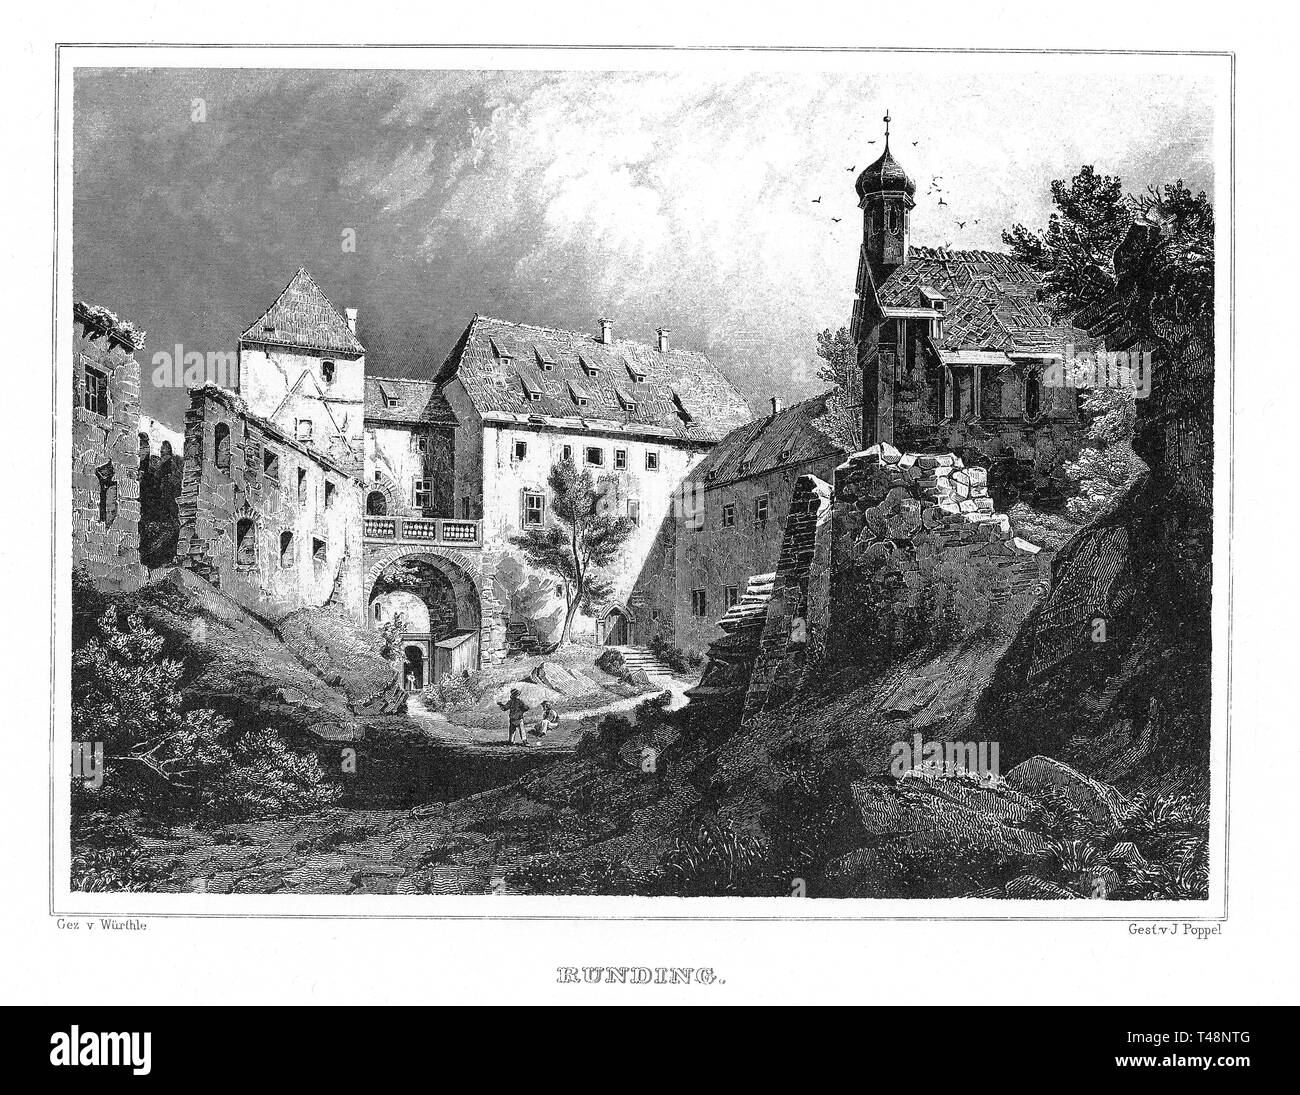 Runding, Upper Palatinate, drawing by Wurthle, steel engraving by J. Poppel, 1840-54, Kingdom of Bavaria, Germany Stock Photo